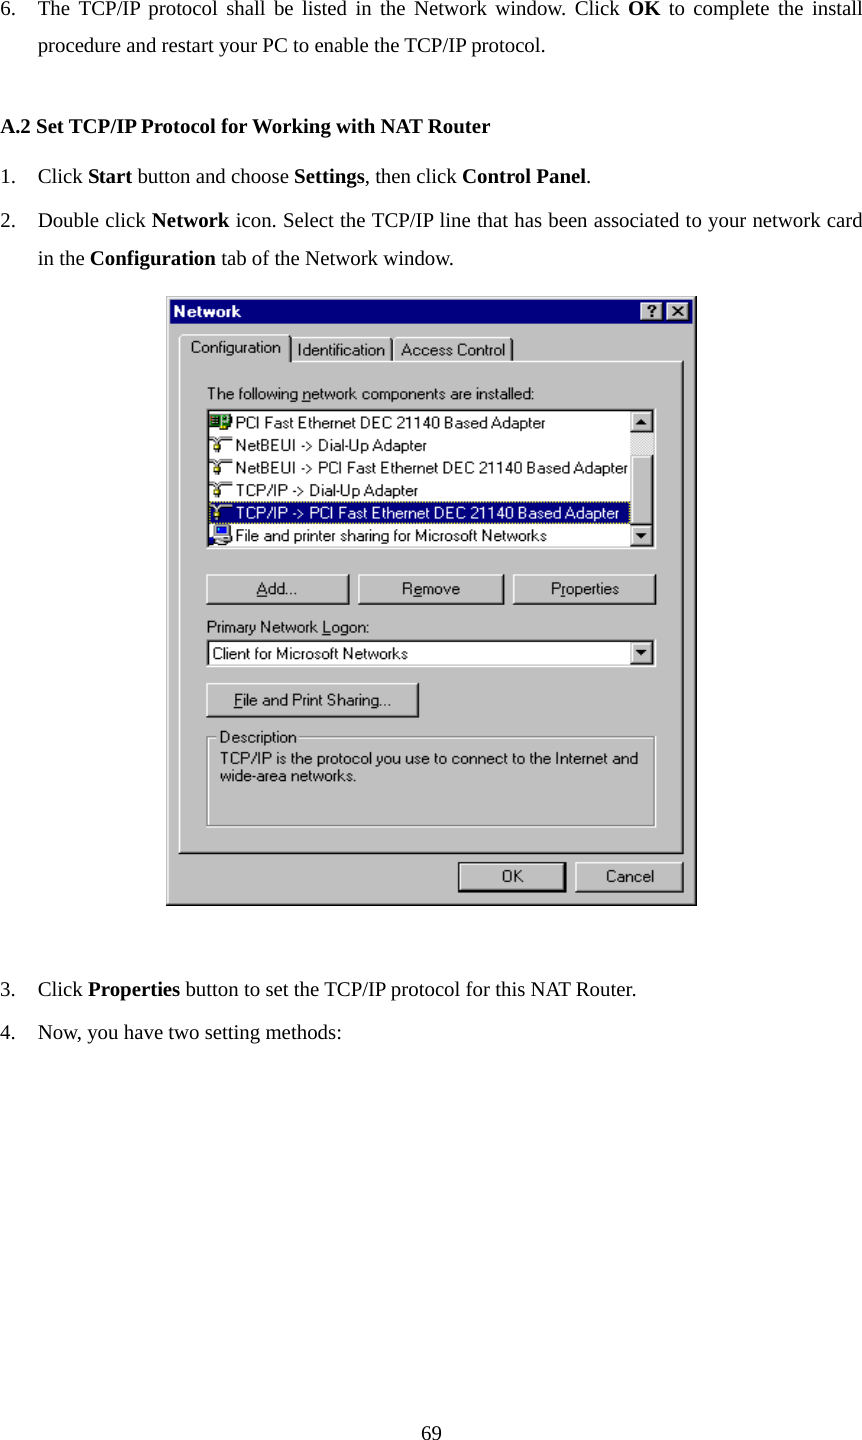  6. The TCP/IP protocol shall be listed in the Network window. Click OK to complete the install procedure and restart your PC to enable the TCP/IP protocol.  A.2 Set TCP/IP Protocol for Working with NAT Router 1. Click Start button and choose Settings, then click Control Panel. 2. Double click Network icon. Select the TCP/IP line that has been associated to your network card in the Configuration tab of the Network window.   3. Click Properties button to set the TCP/IP protocol for this NAT Router. 4. Now, you have two setting methods:  69